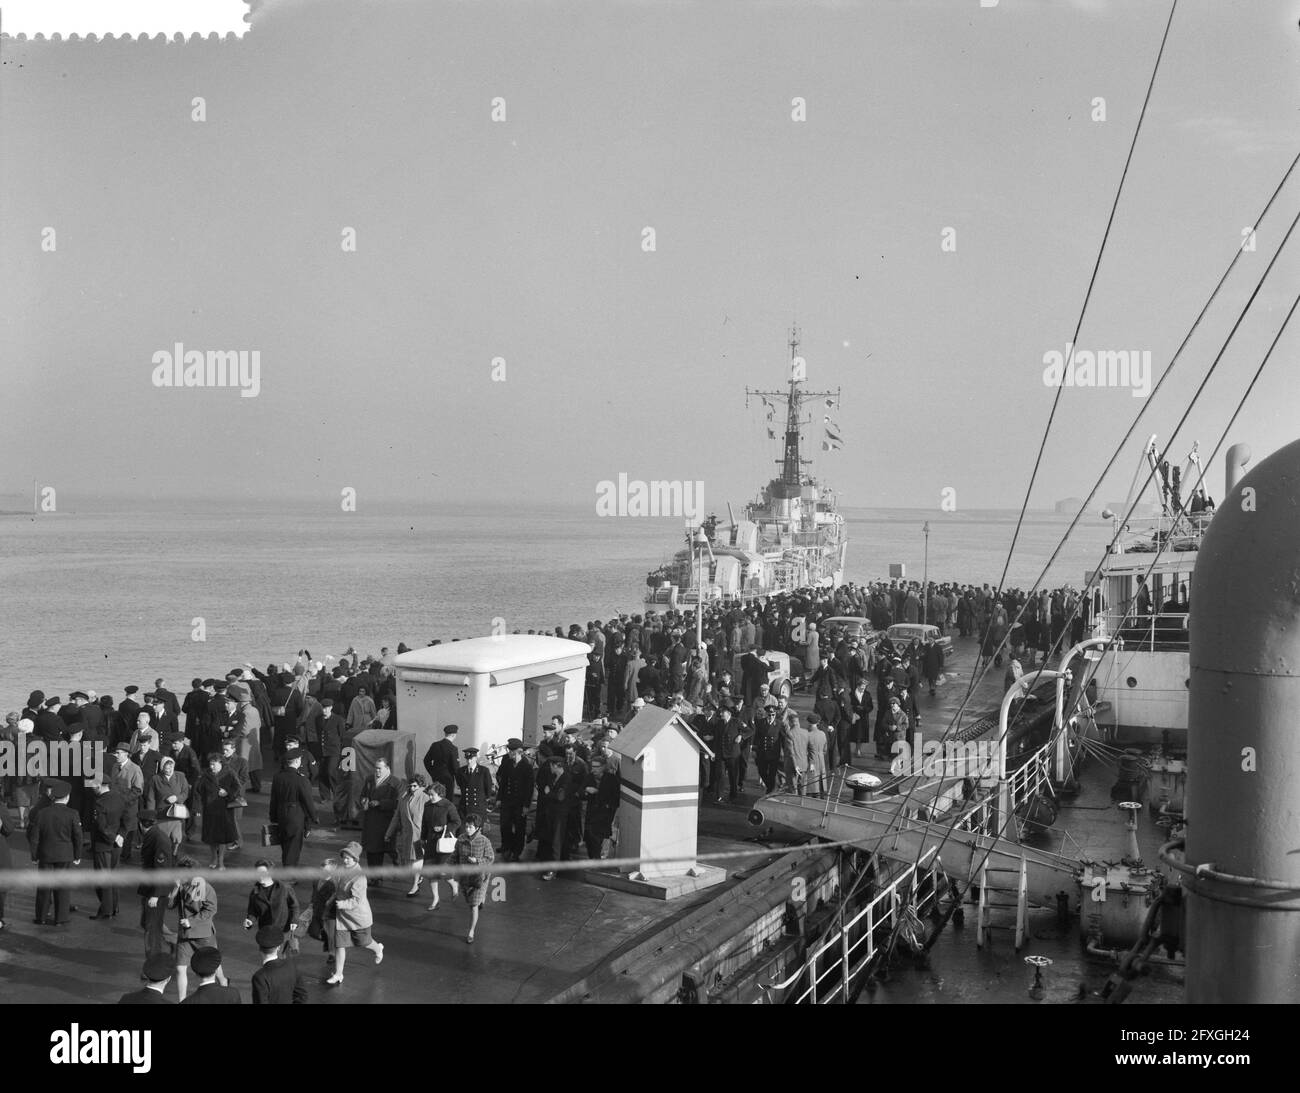 Departure of Hr. Ms. frigate Evertsen from Den Helder to New Guinea, waved  after by bearers departs the Evertsen, February 15, 1961, navy, ships, run  out, The Netherlands, 20th century press agency